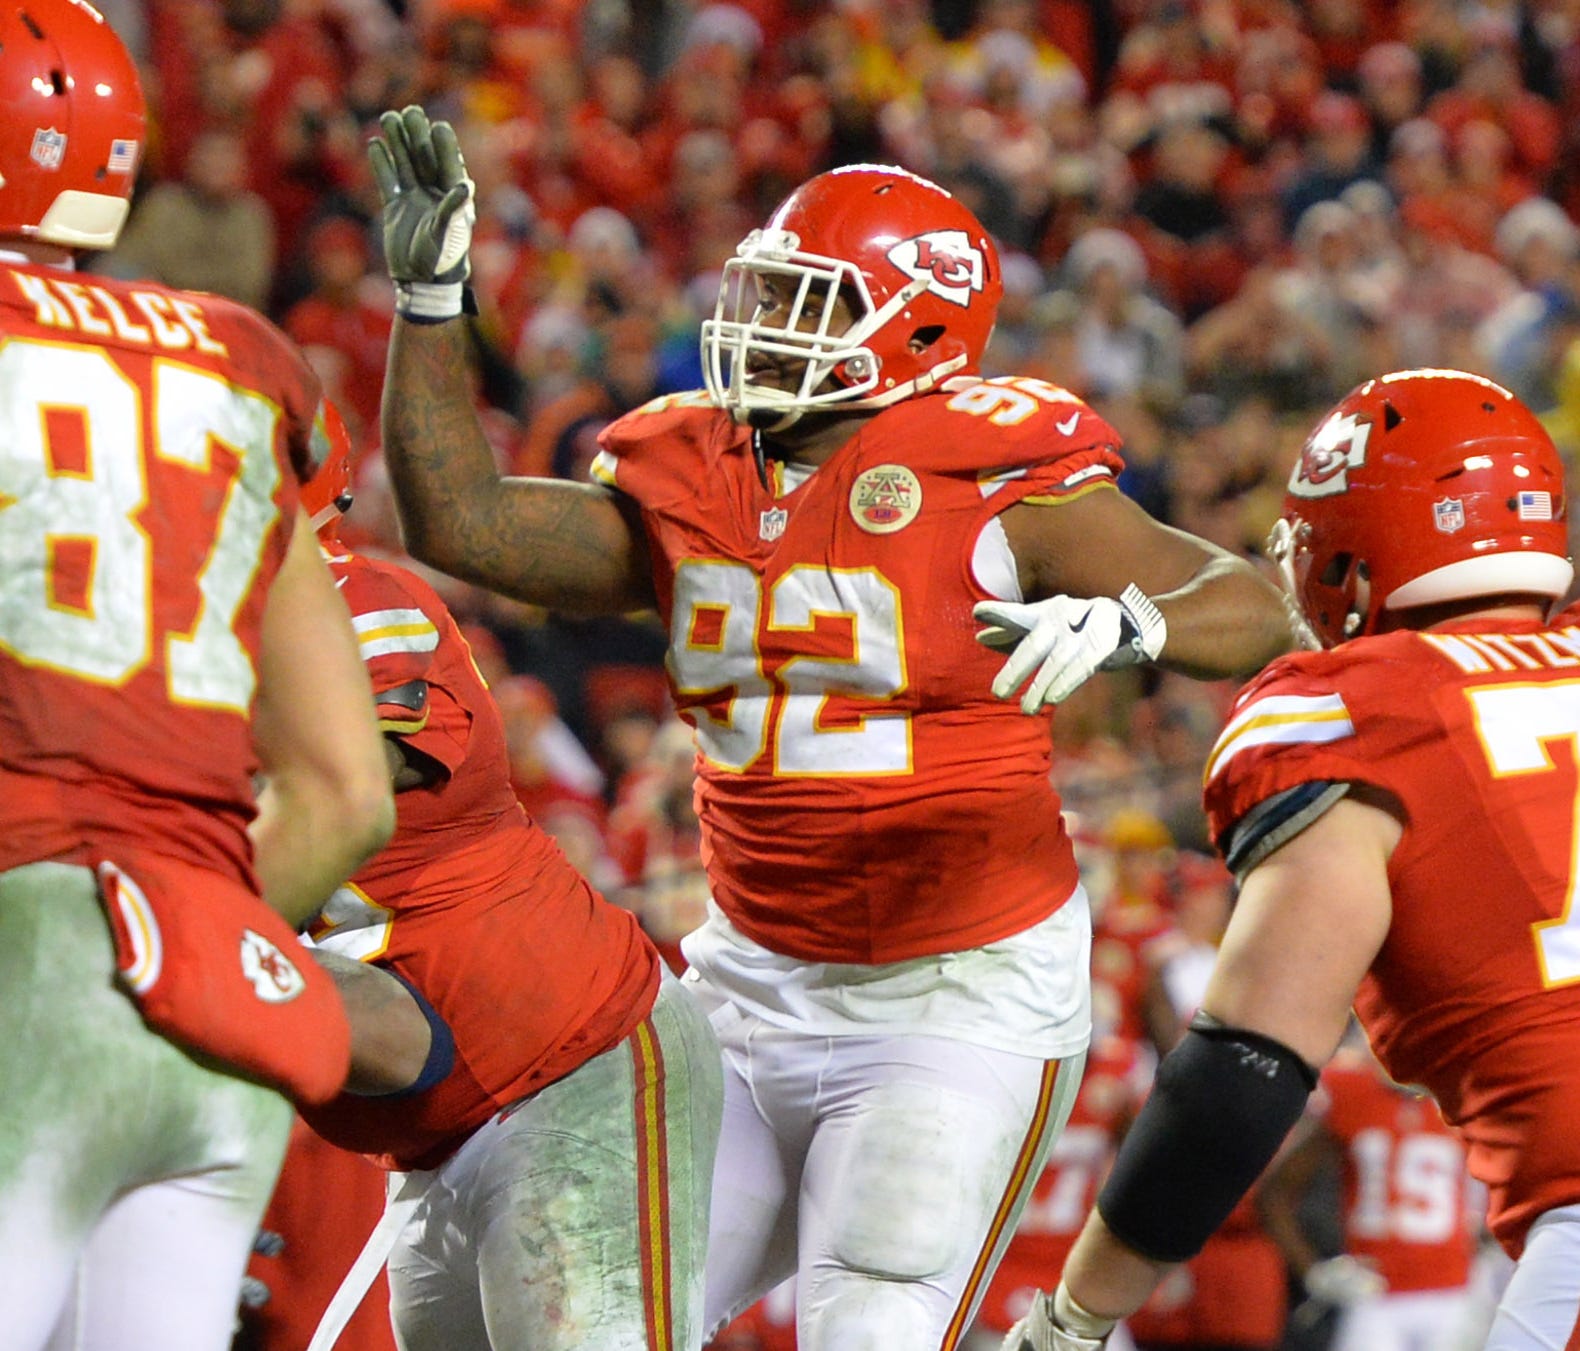 Dontari Poe's jump-pass TD is one of the highlights of the NFL season.